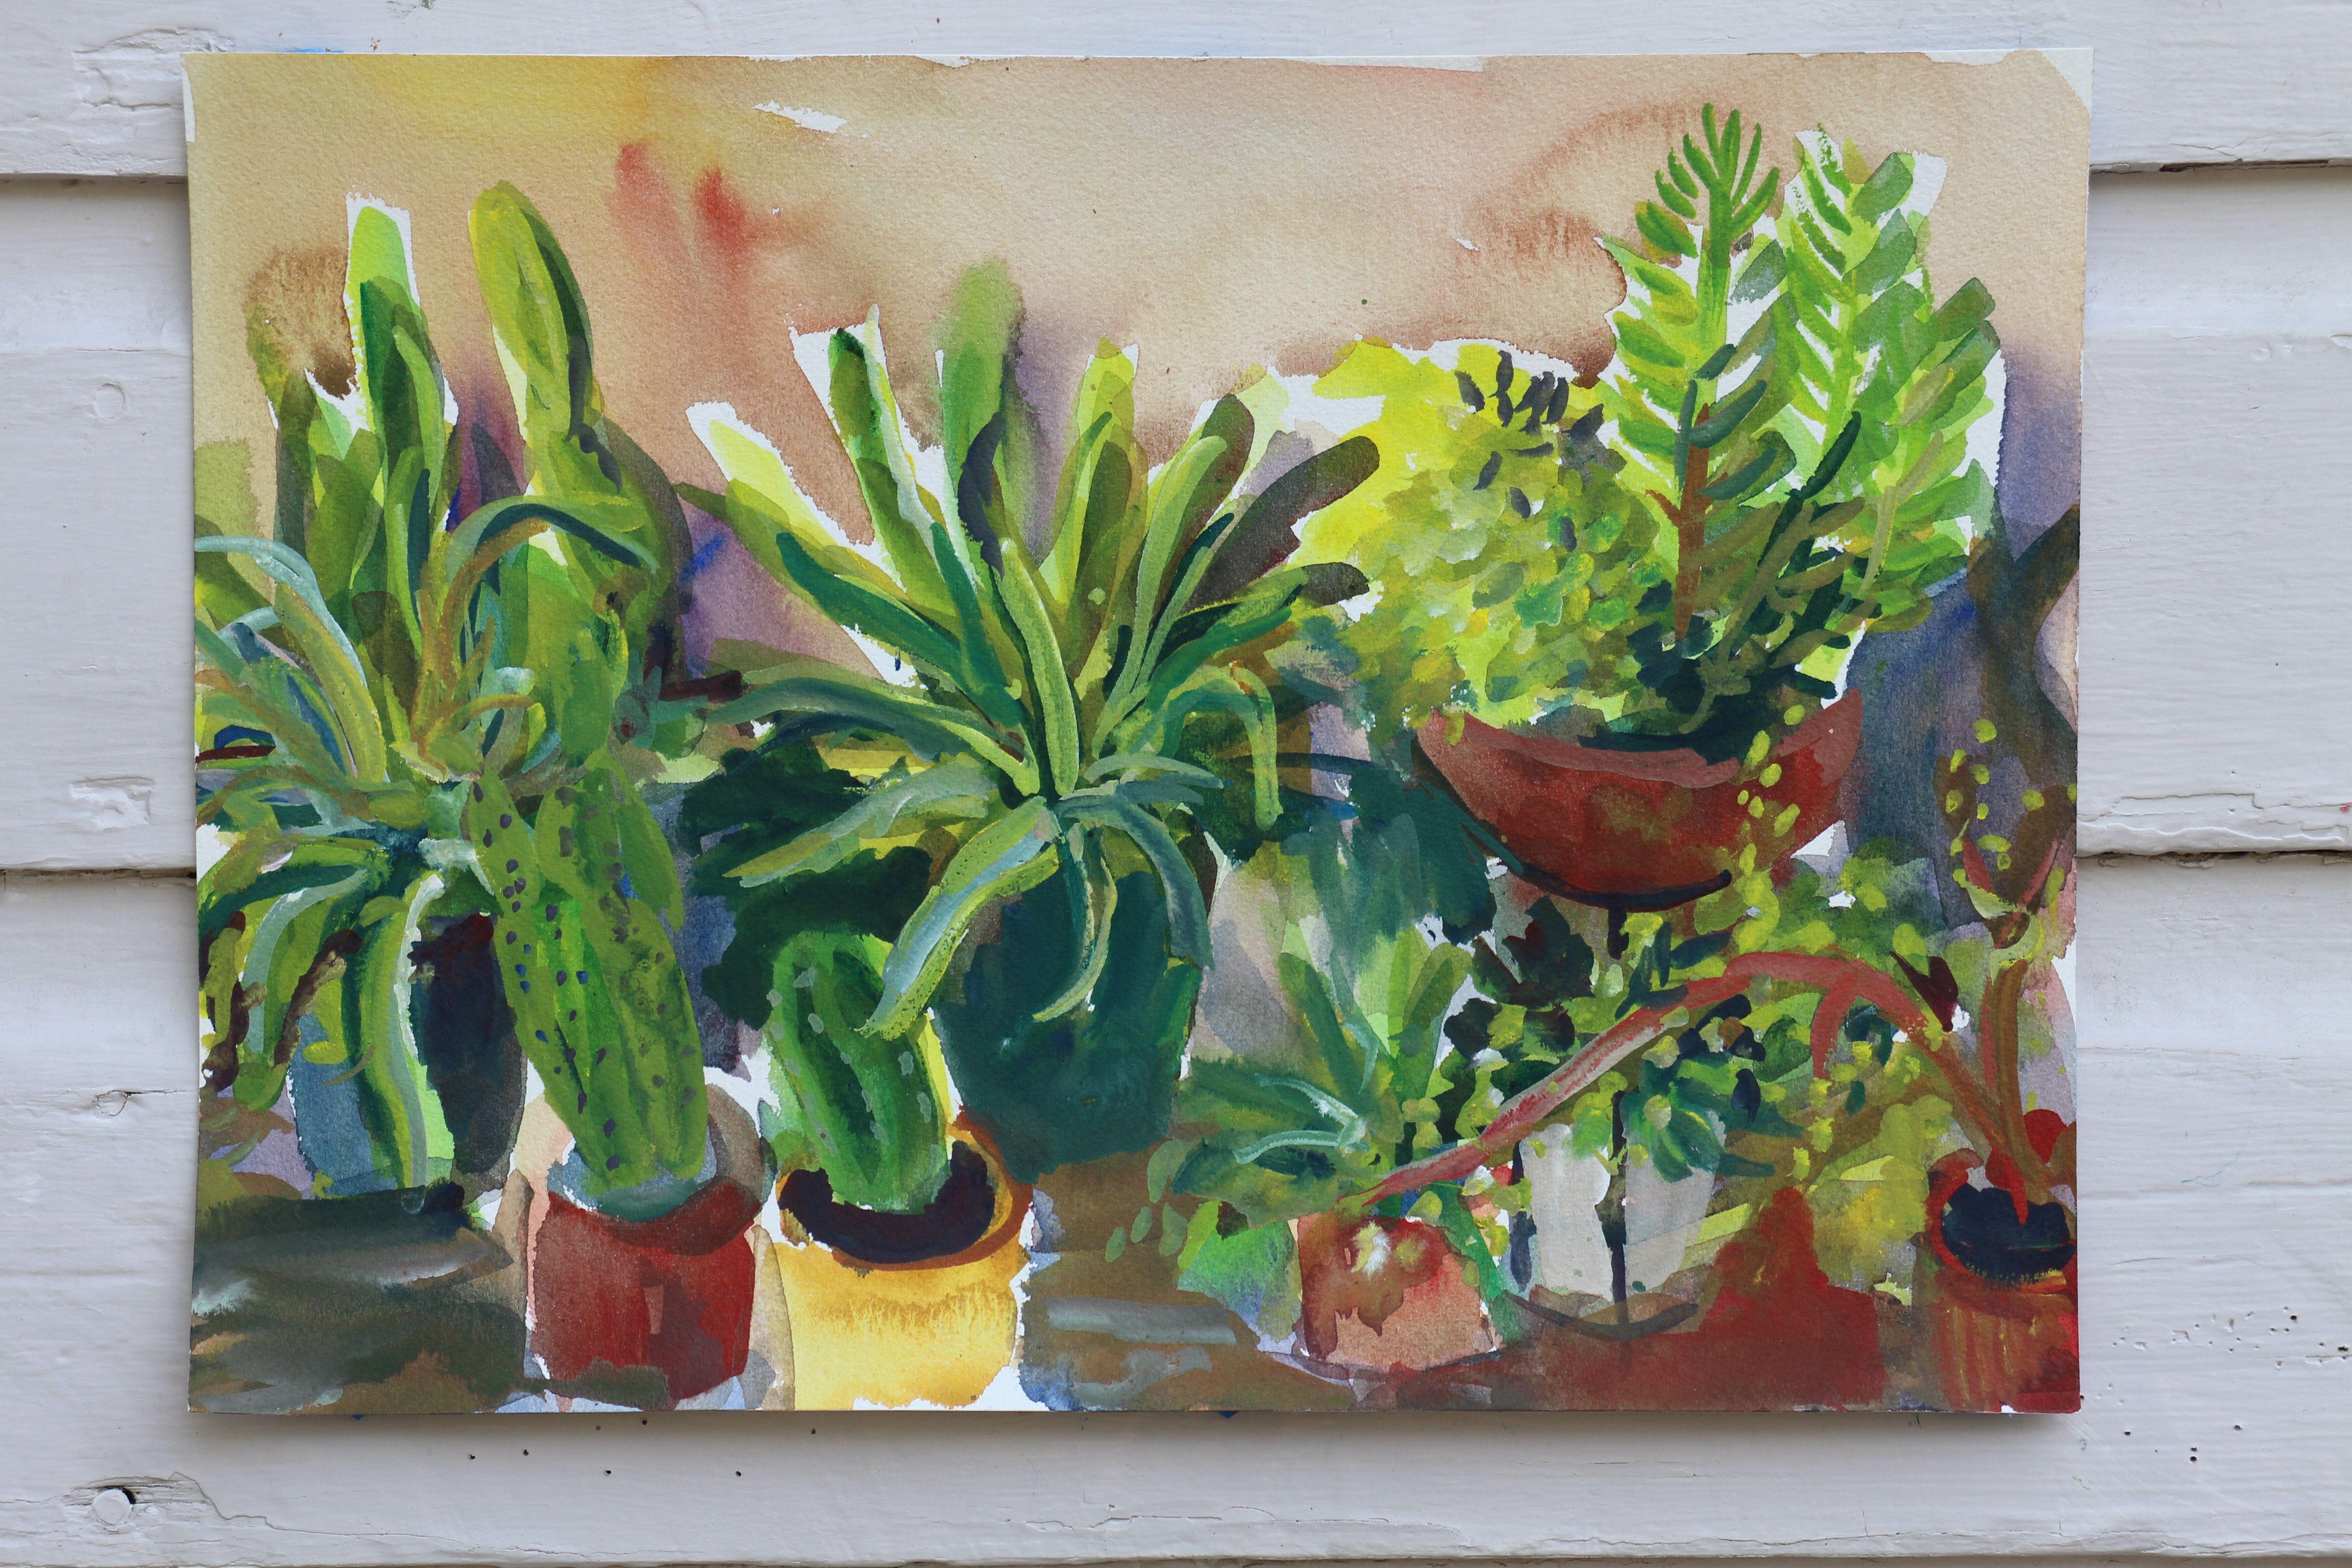 Cactus plants #2, Painting, Watercolor on Watercolor Paper - Impressionist Art by John Kilduff